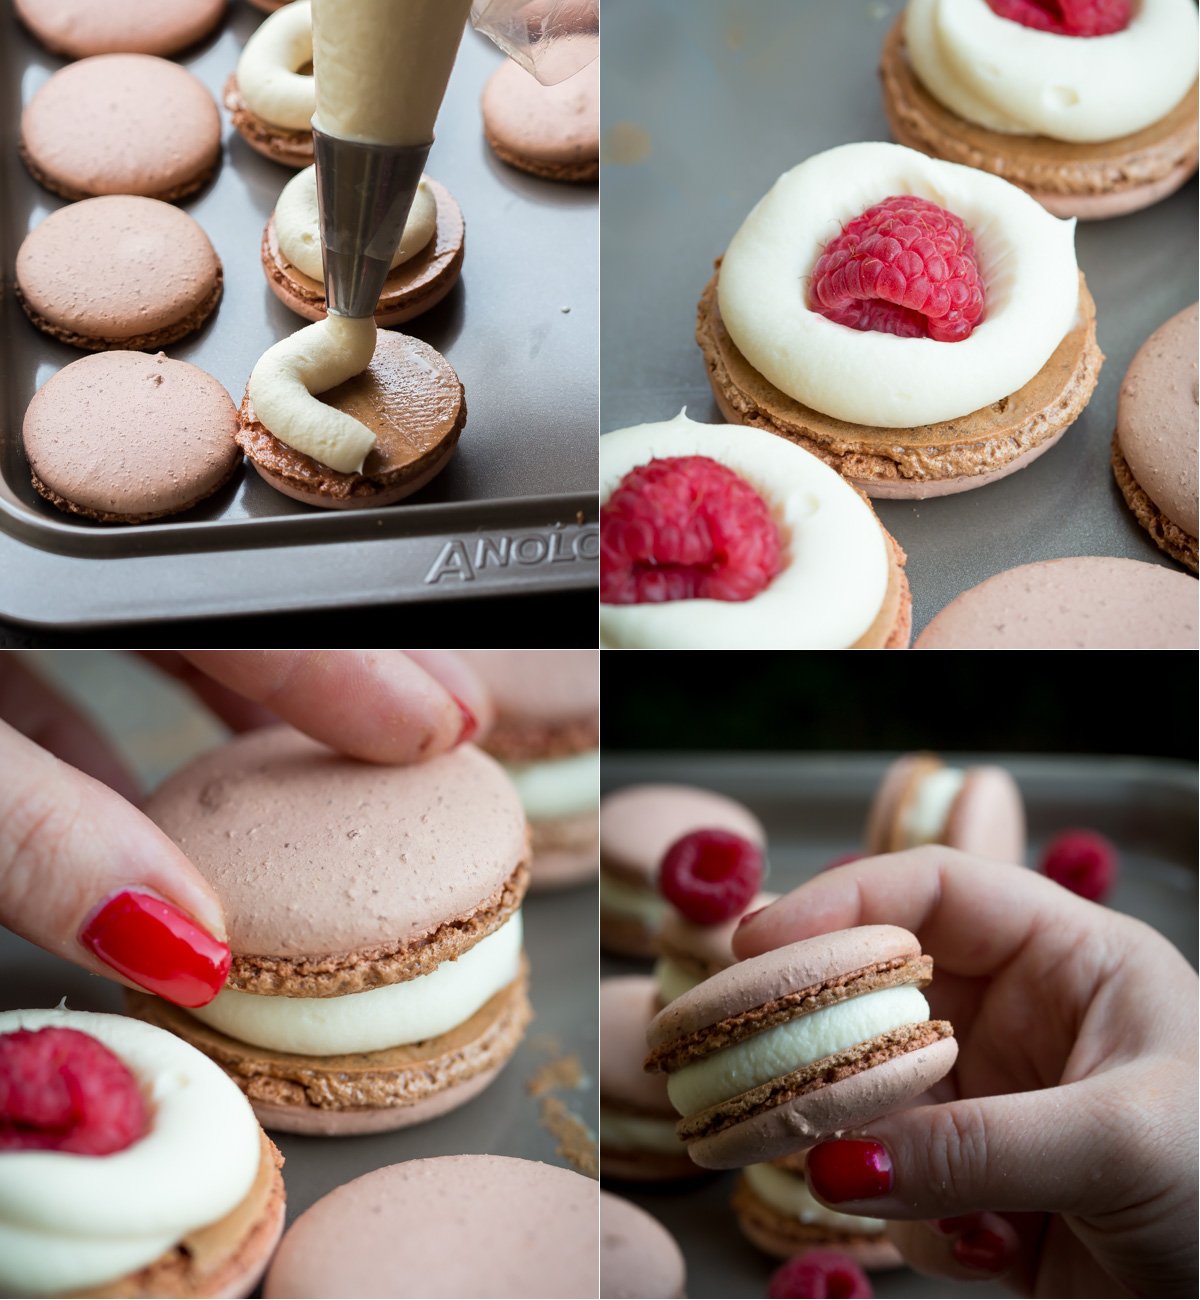 White Chocolate Raspberry Macarons - the tart raspberry adds the perfect balance to these sweet little meringue confections.